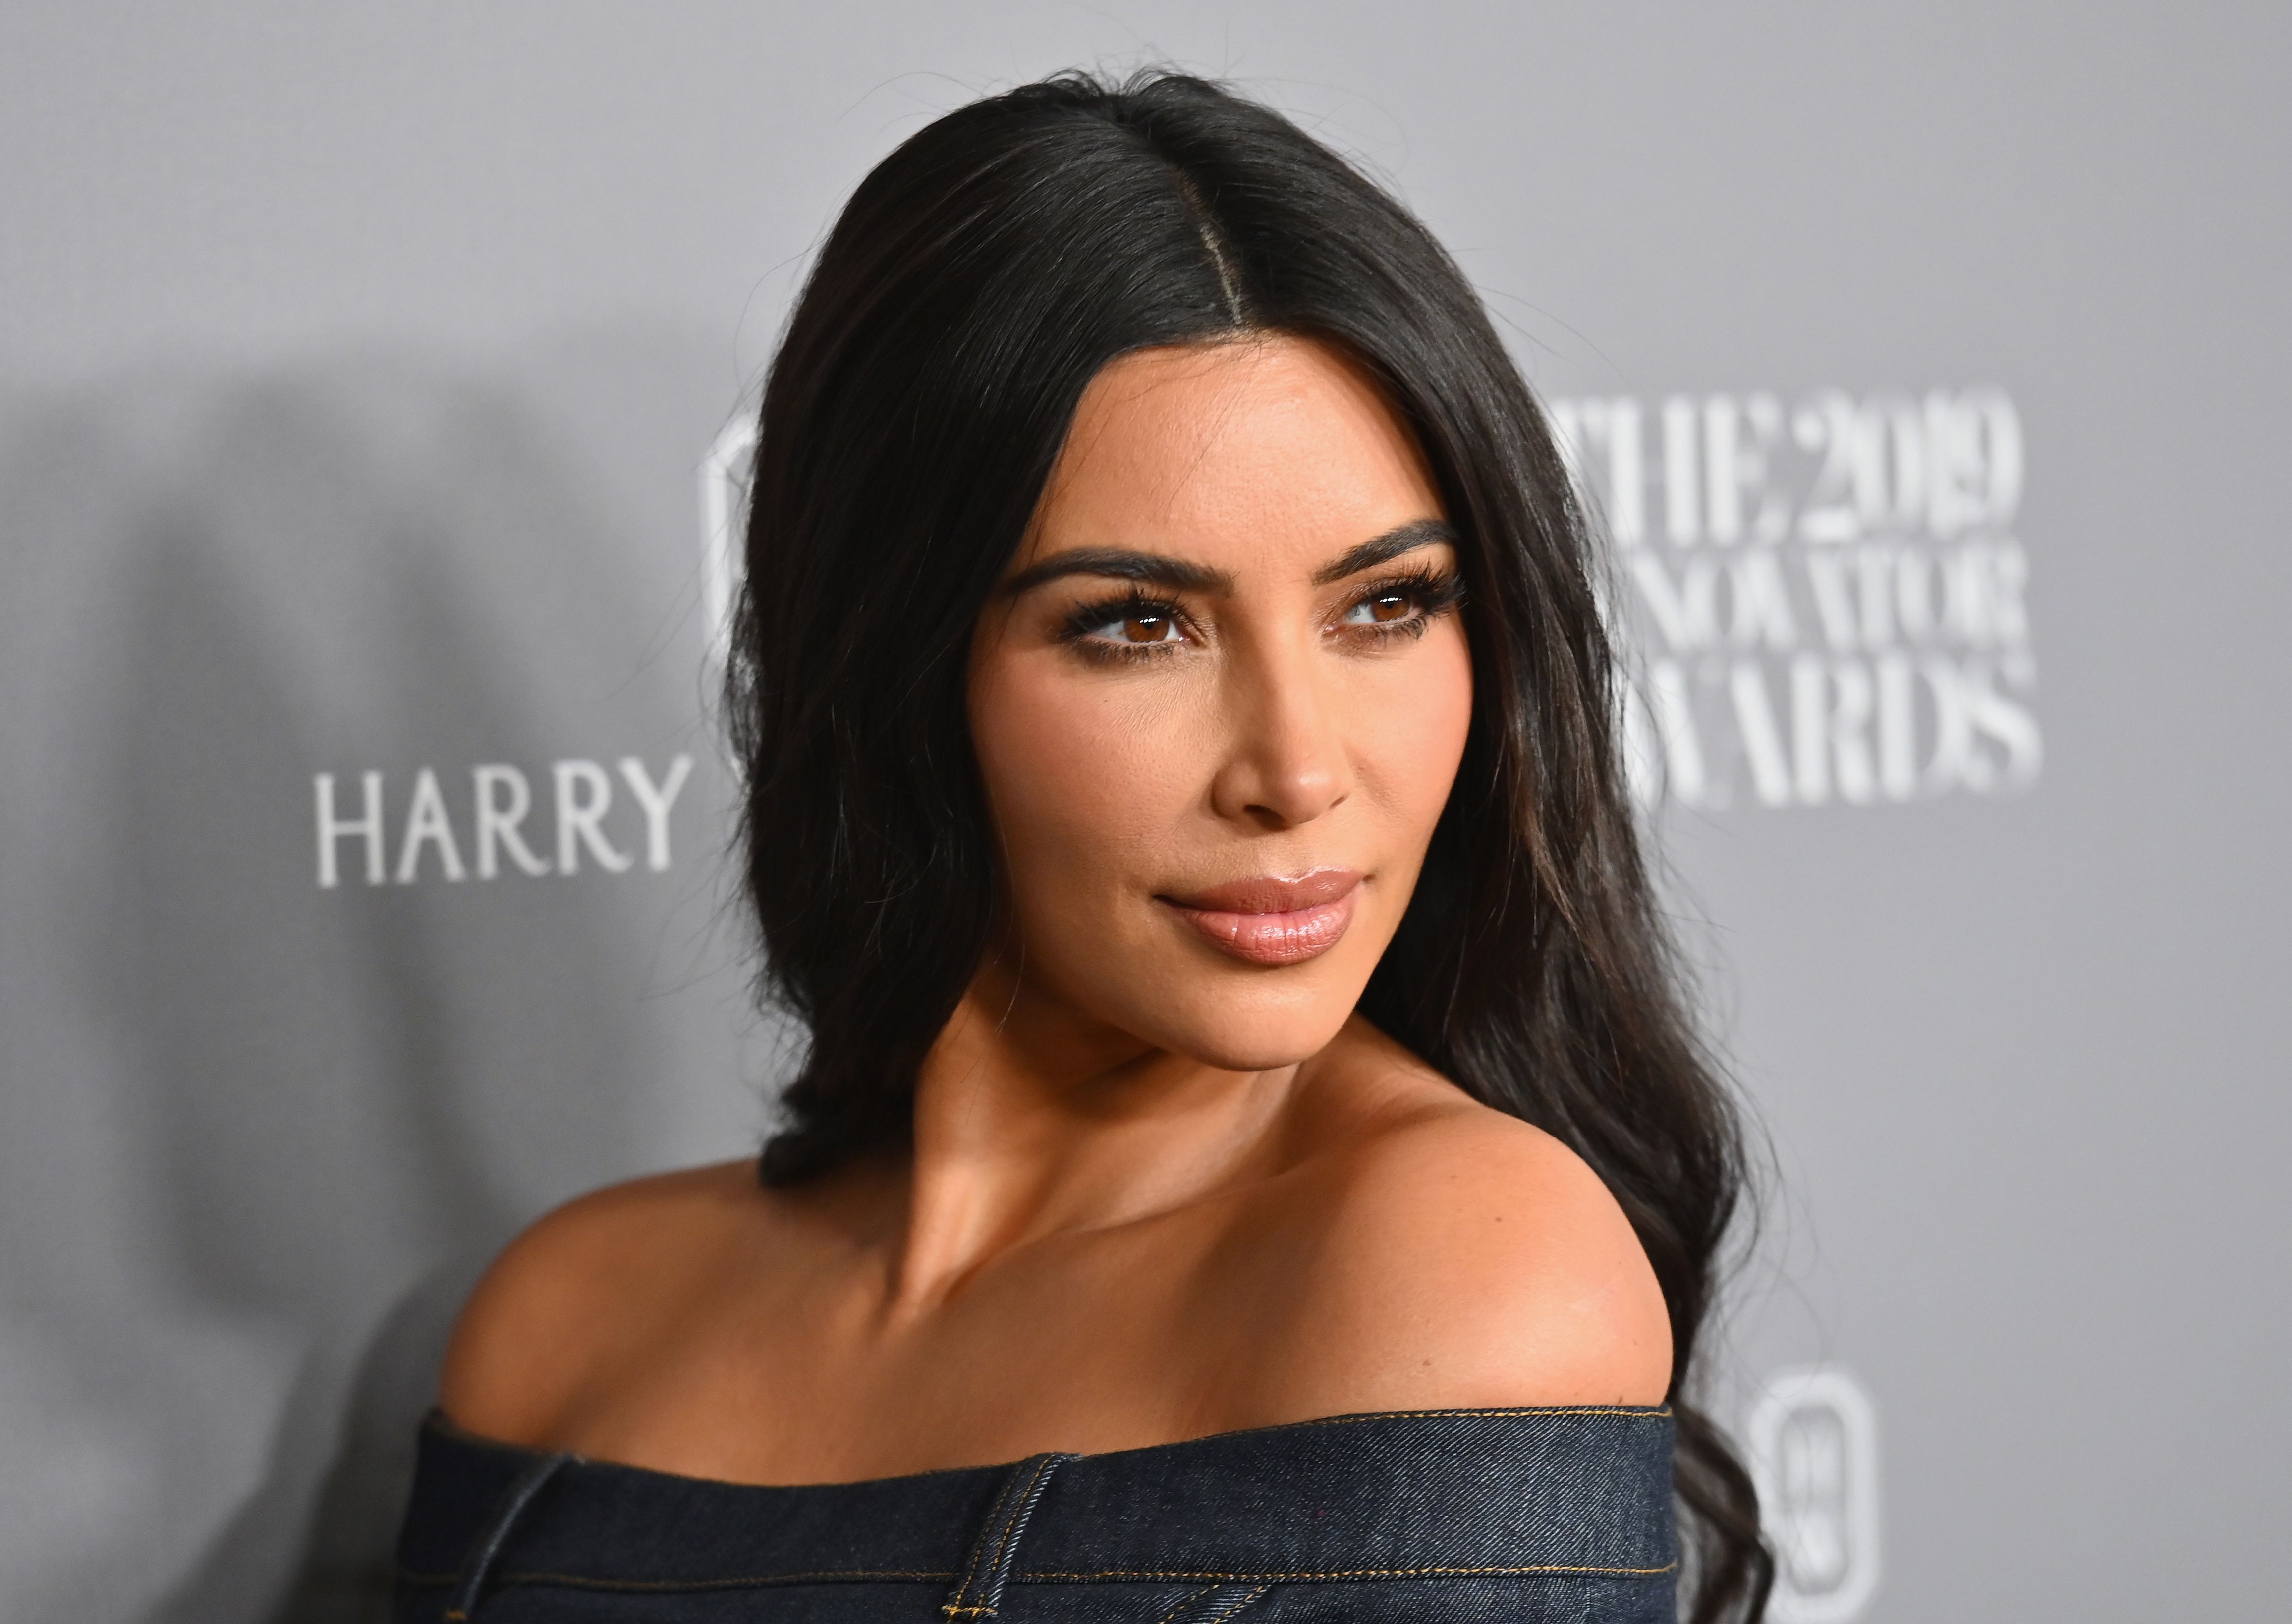 Kim Kardashian West and Kylie Jenner Herald the Age of Instagram  Billionaires - Bloomberg